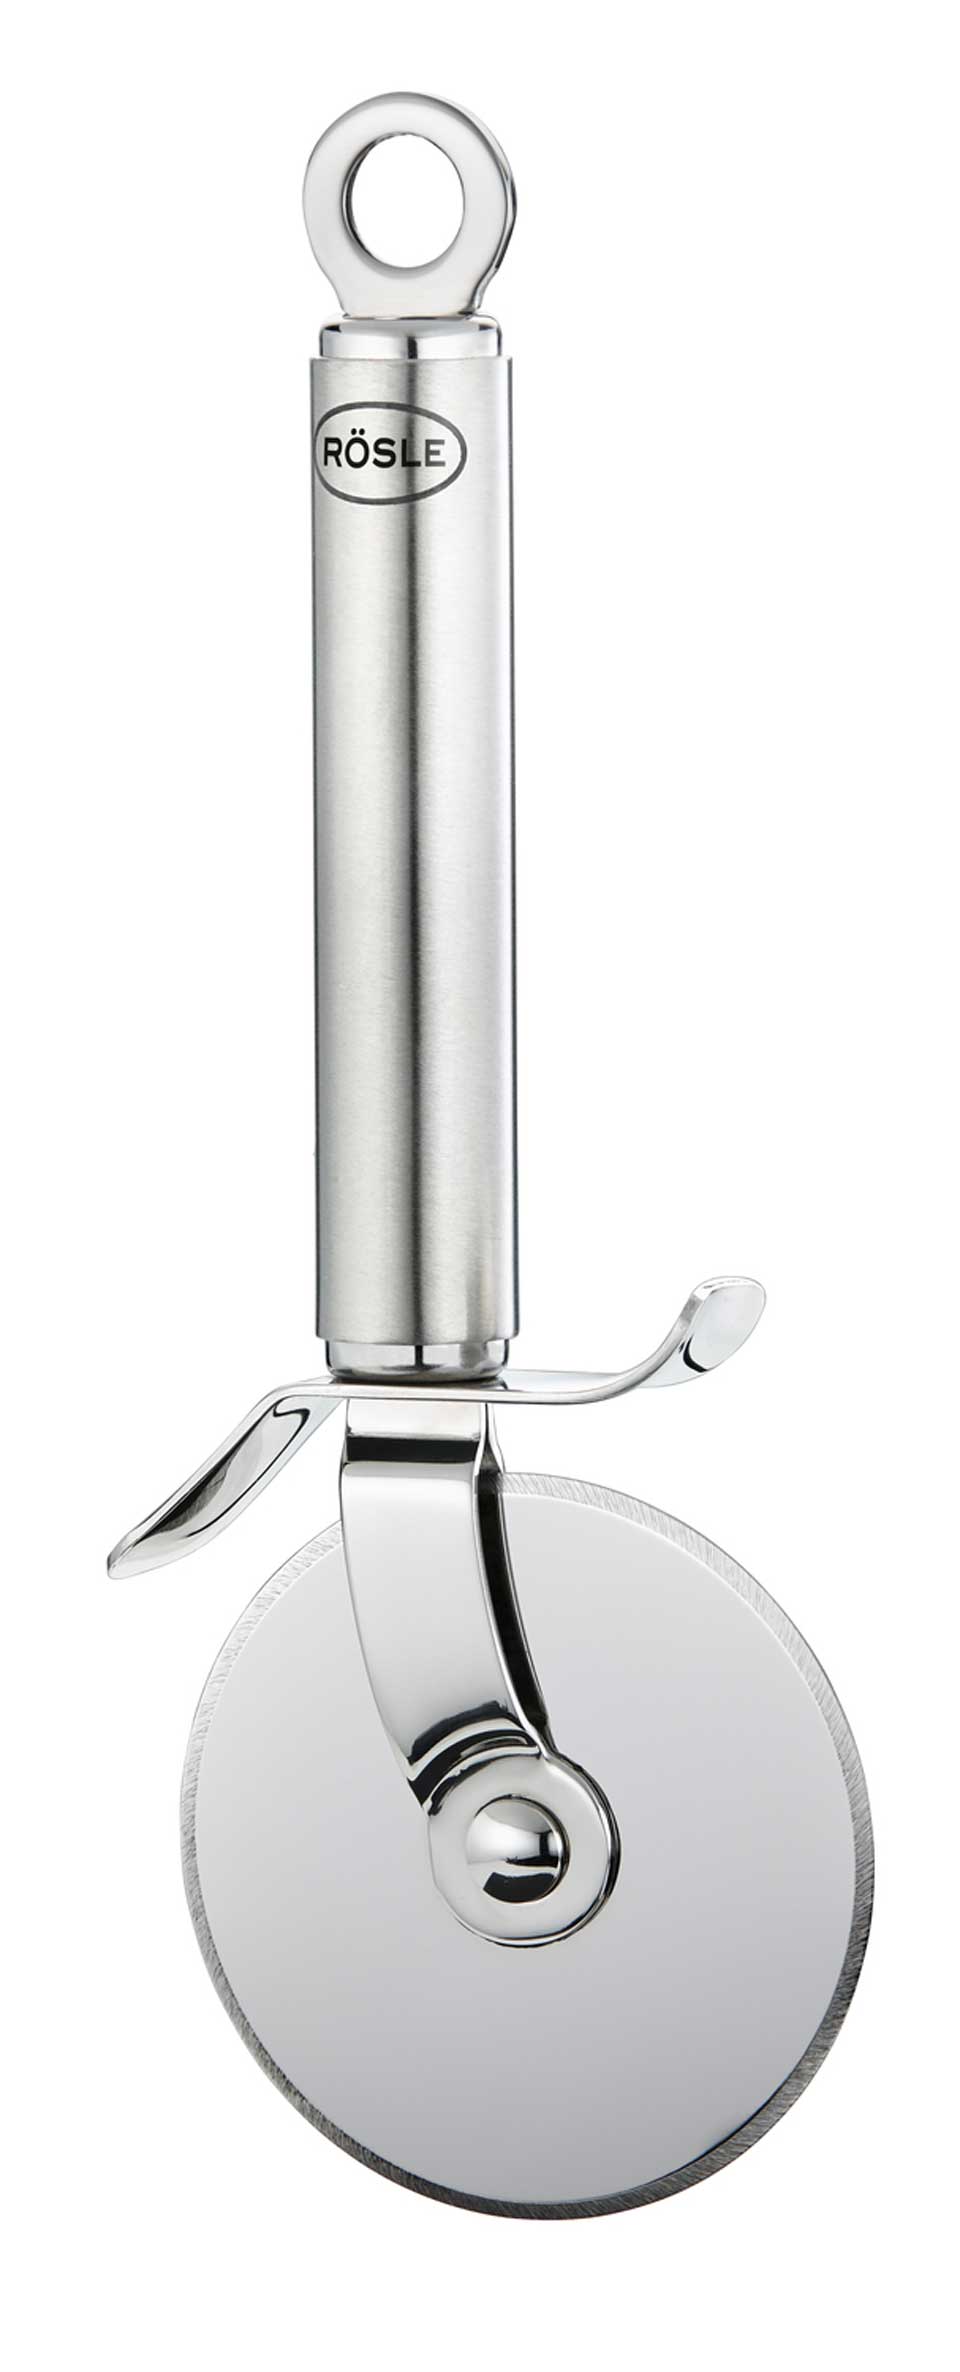 Rosle Pizza Cutter- with Stem Handle